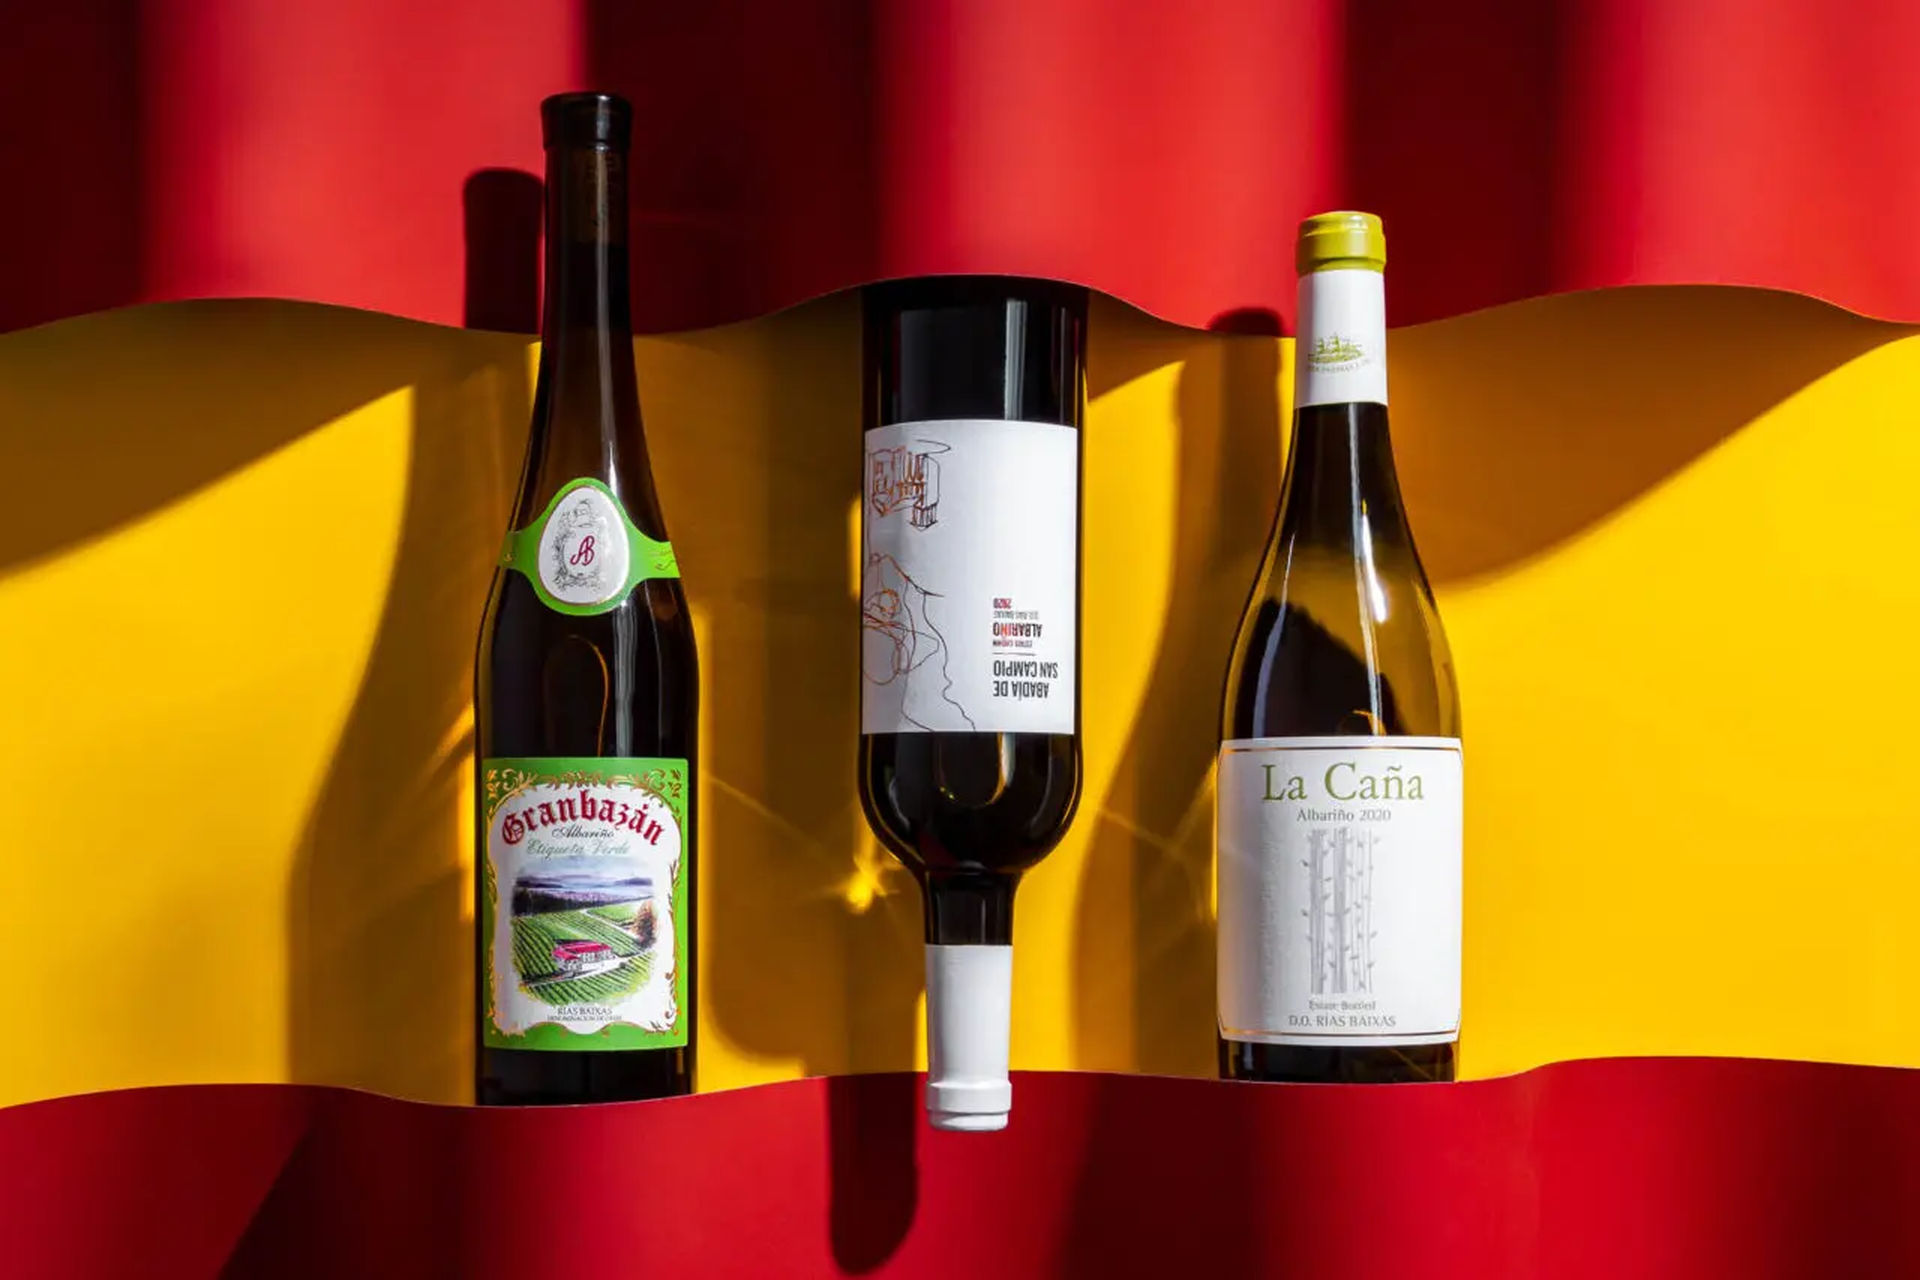 Bottles of Albariño. / Photo and Prop Styling by: Tom Arena